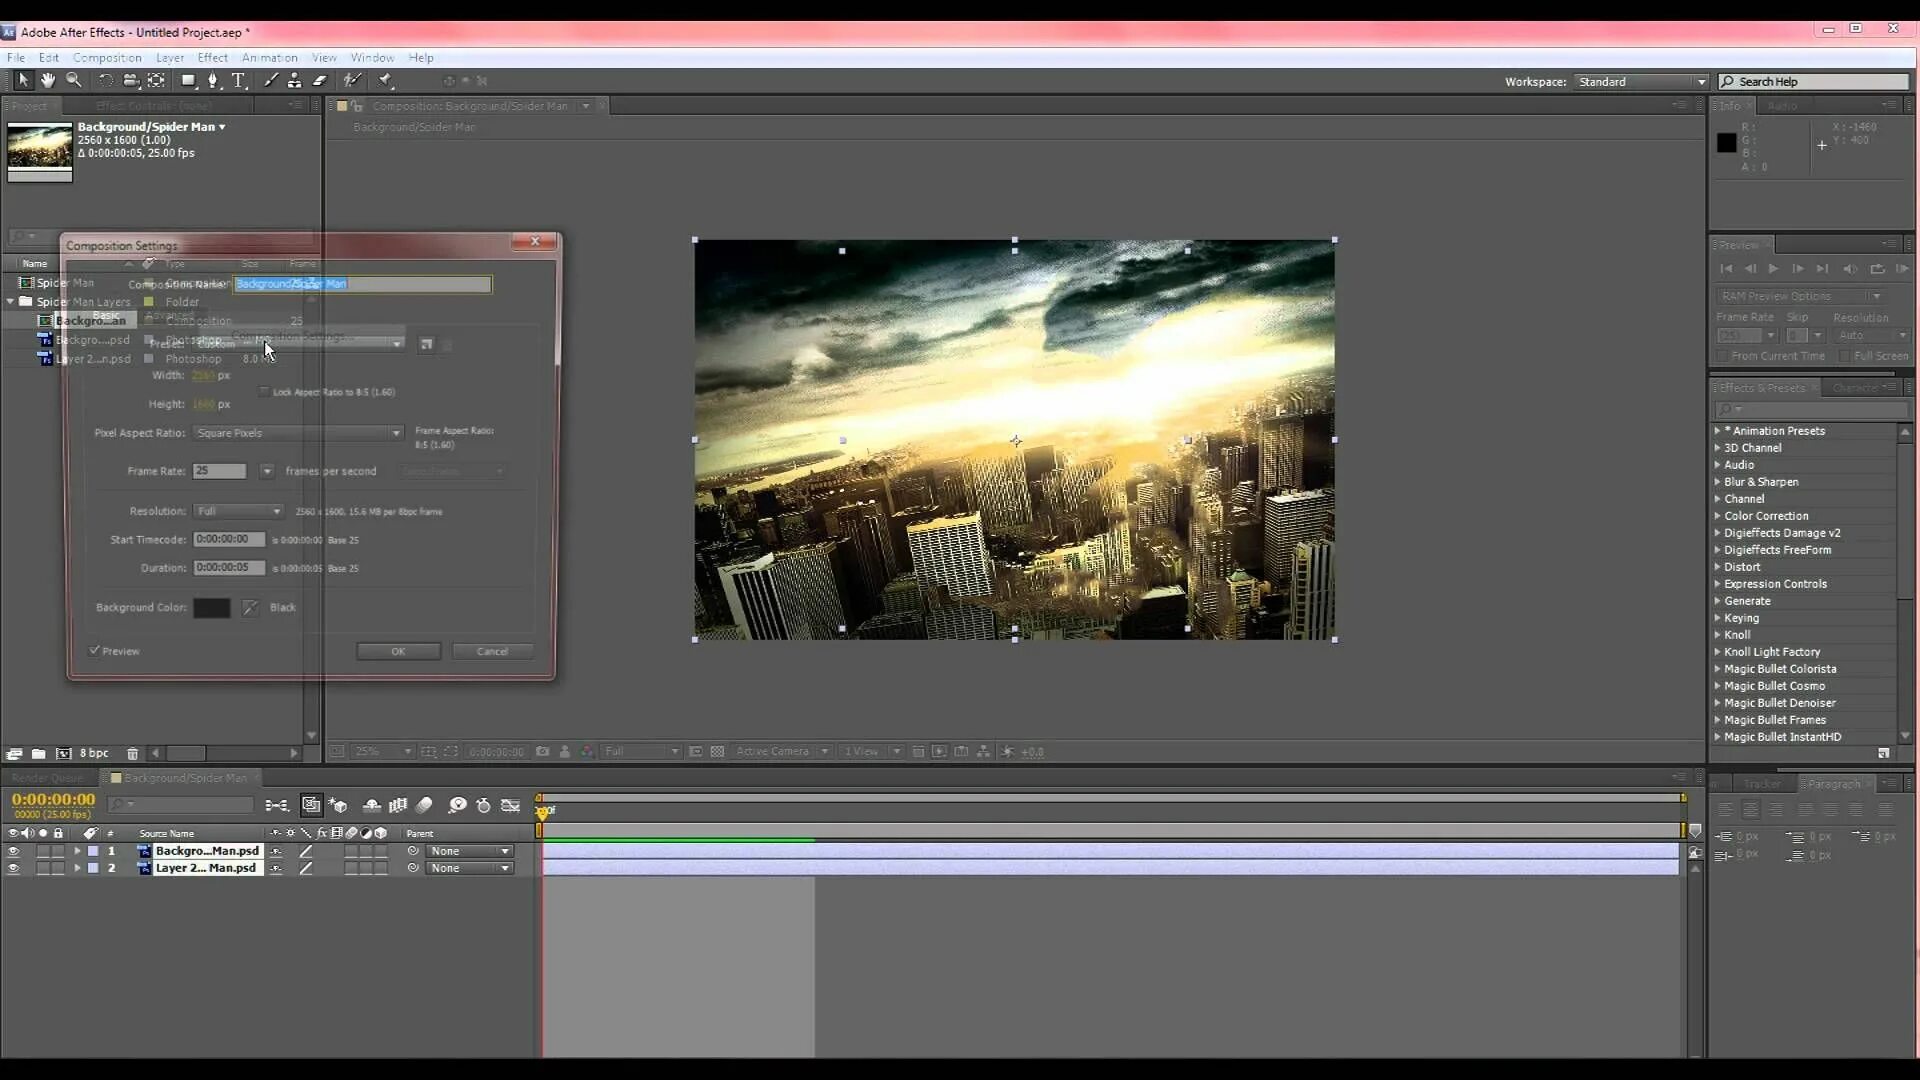 3д after effects. Афтер эффект 3д. After Effects 3d. 3d анимация в after Effects. Adobe after Effects 3d.